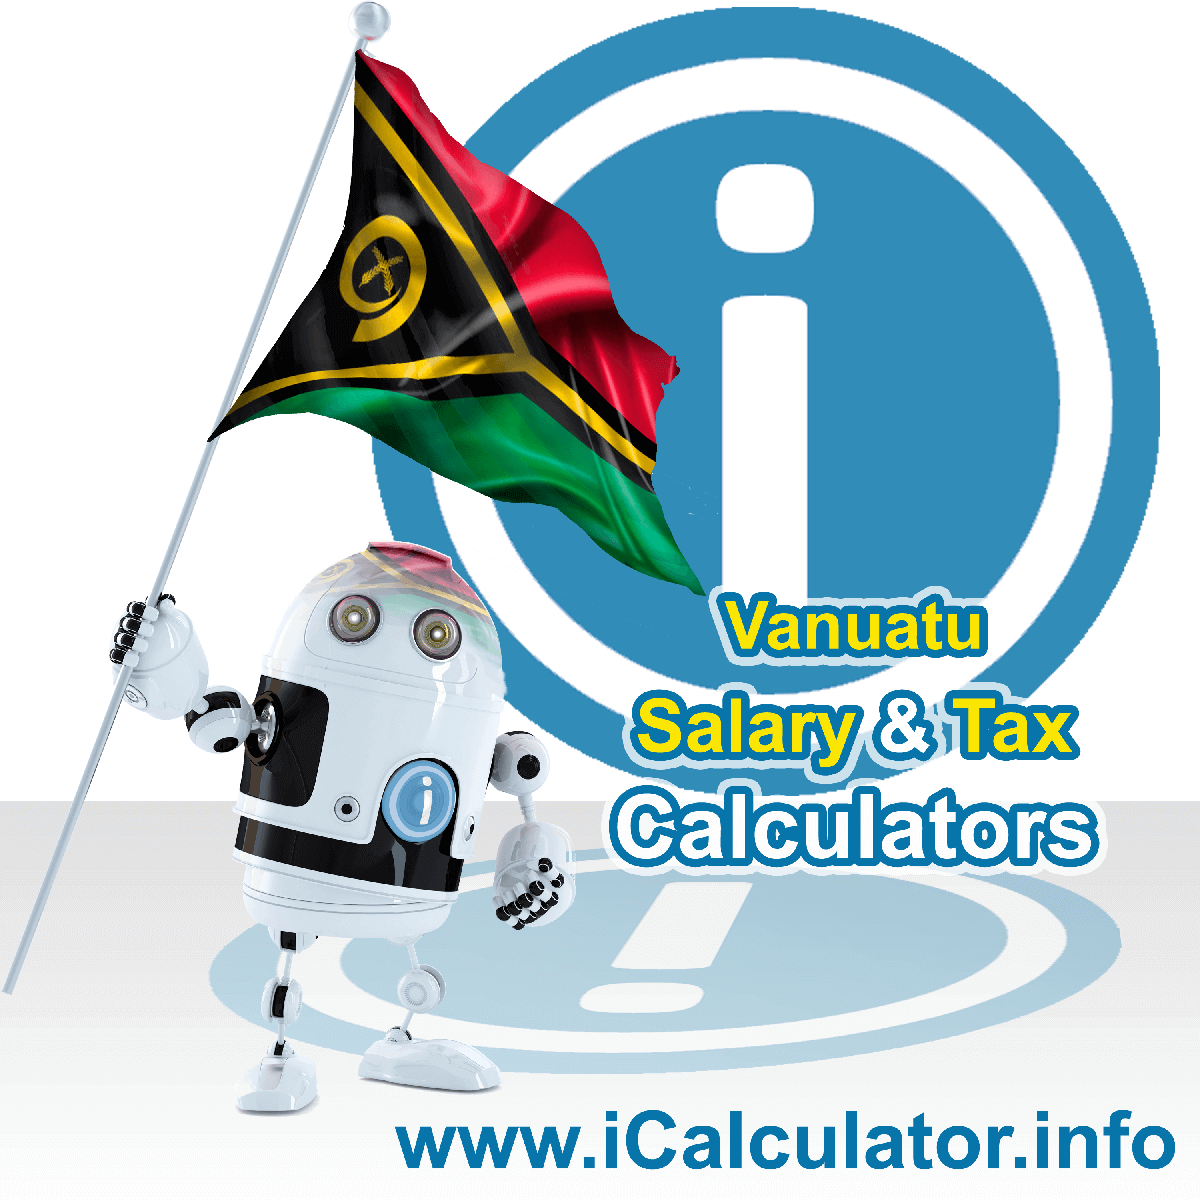 Vanuatu Wage Calculator. This image shows the Vanuatu flag and information relating to the tax formula for the Vanuatu Tax Calculator